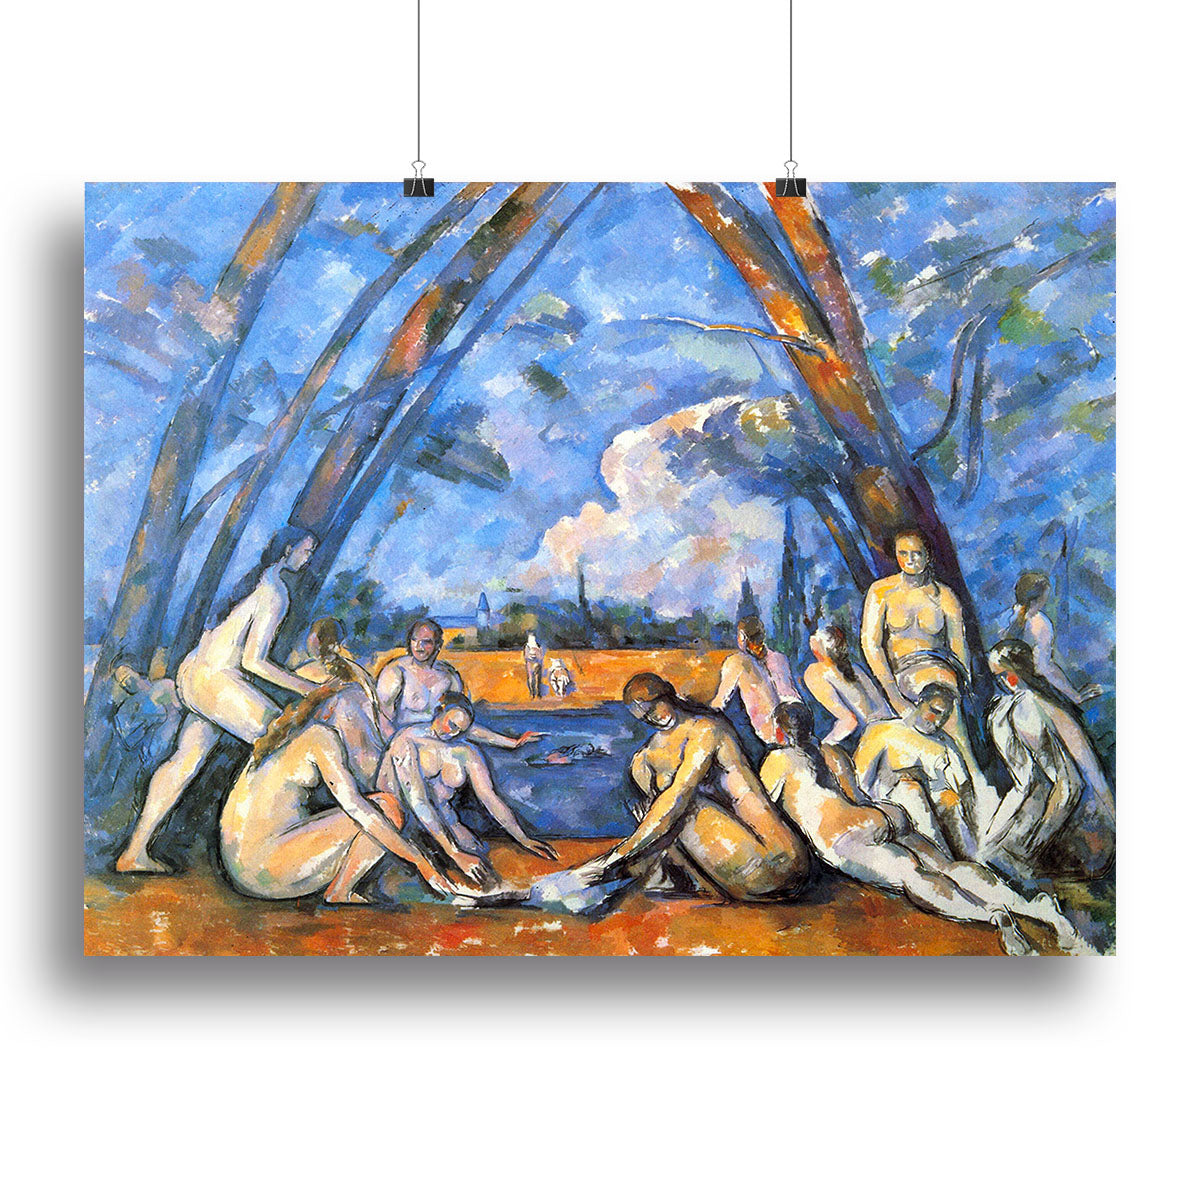 Large Bathers 2 by Cezanne Canvas Print or Poster - Canvas Art Rocks - 2